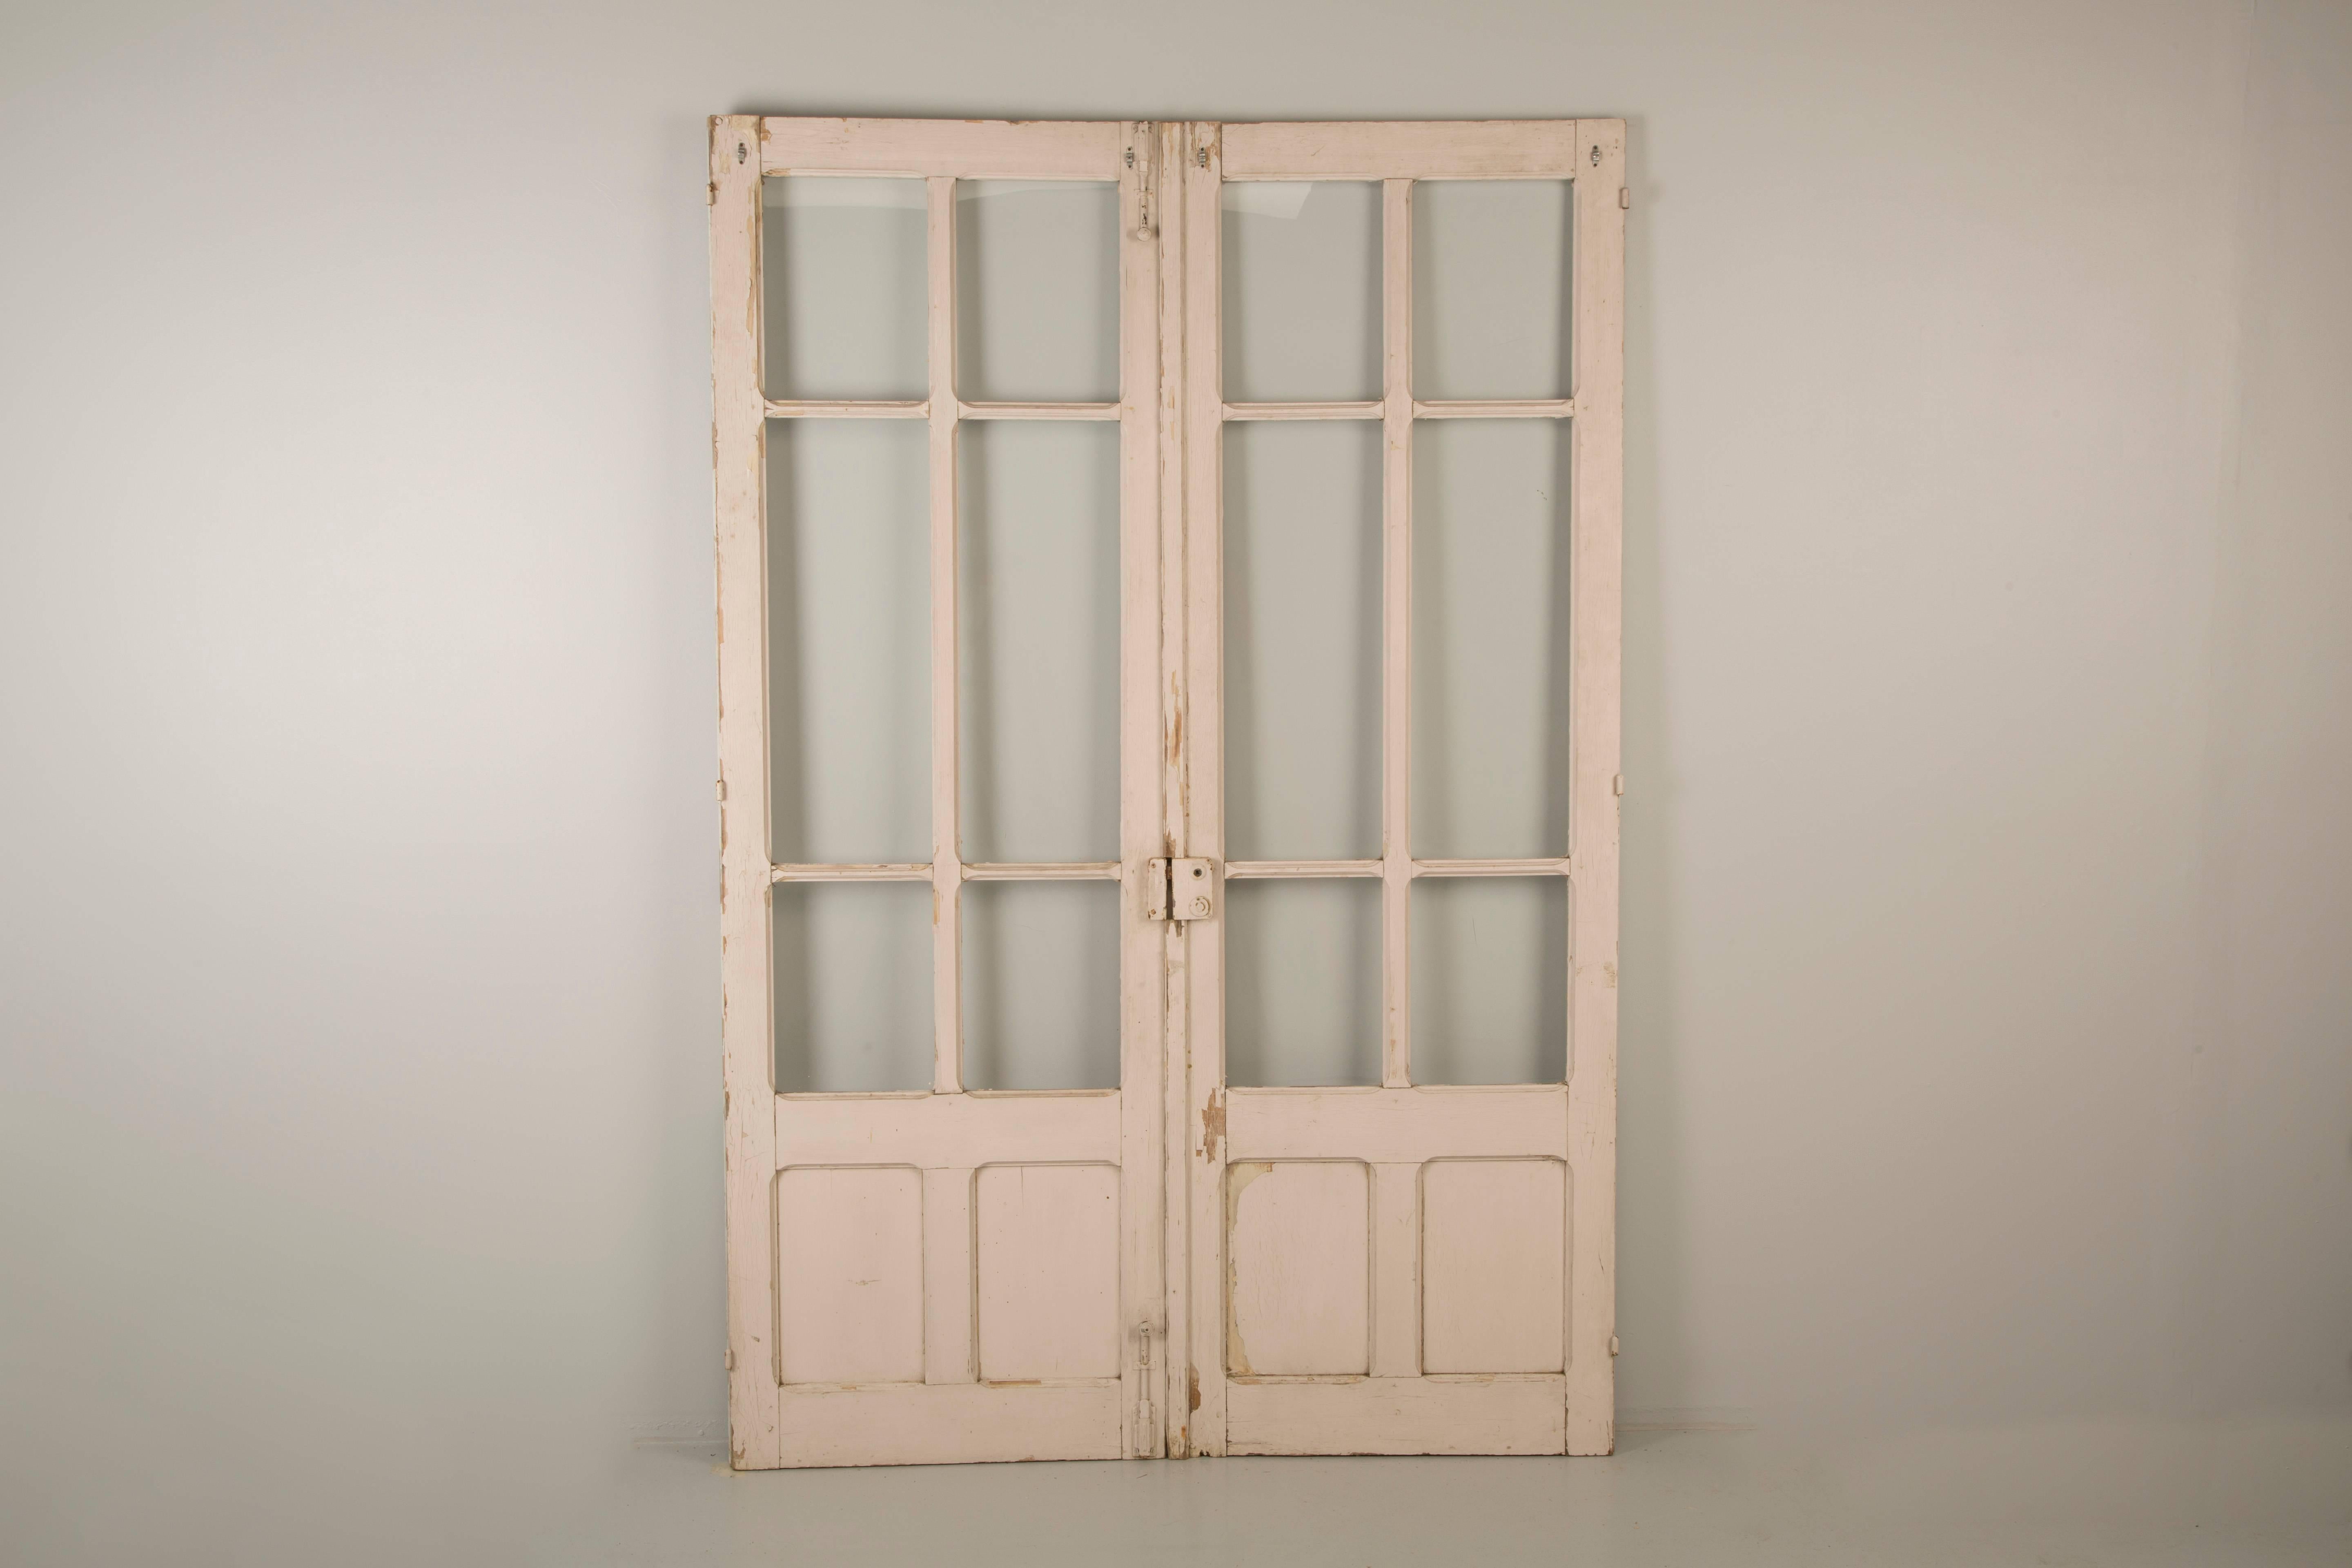 Antique pair of French original paint doors, from the French Provence region. We left the antique French doors in their original, as found condition, so that they can be used as is, or refinished to suit your particular needs. Not sure how the color